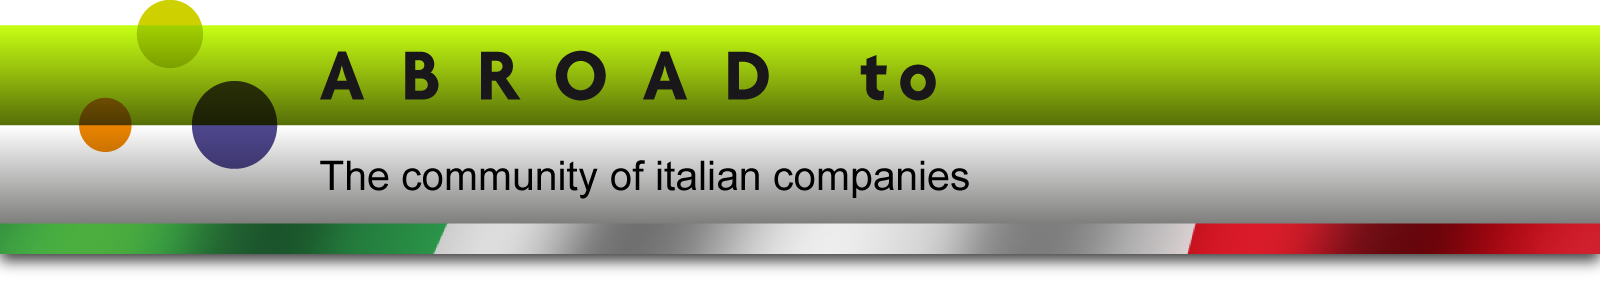 Abroad to - The community of italian companies